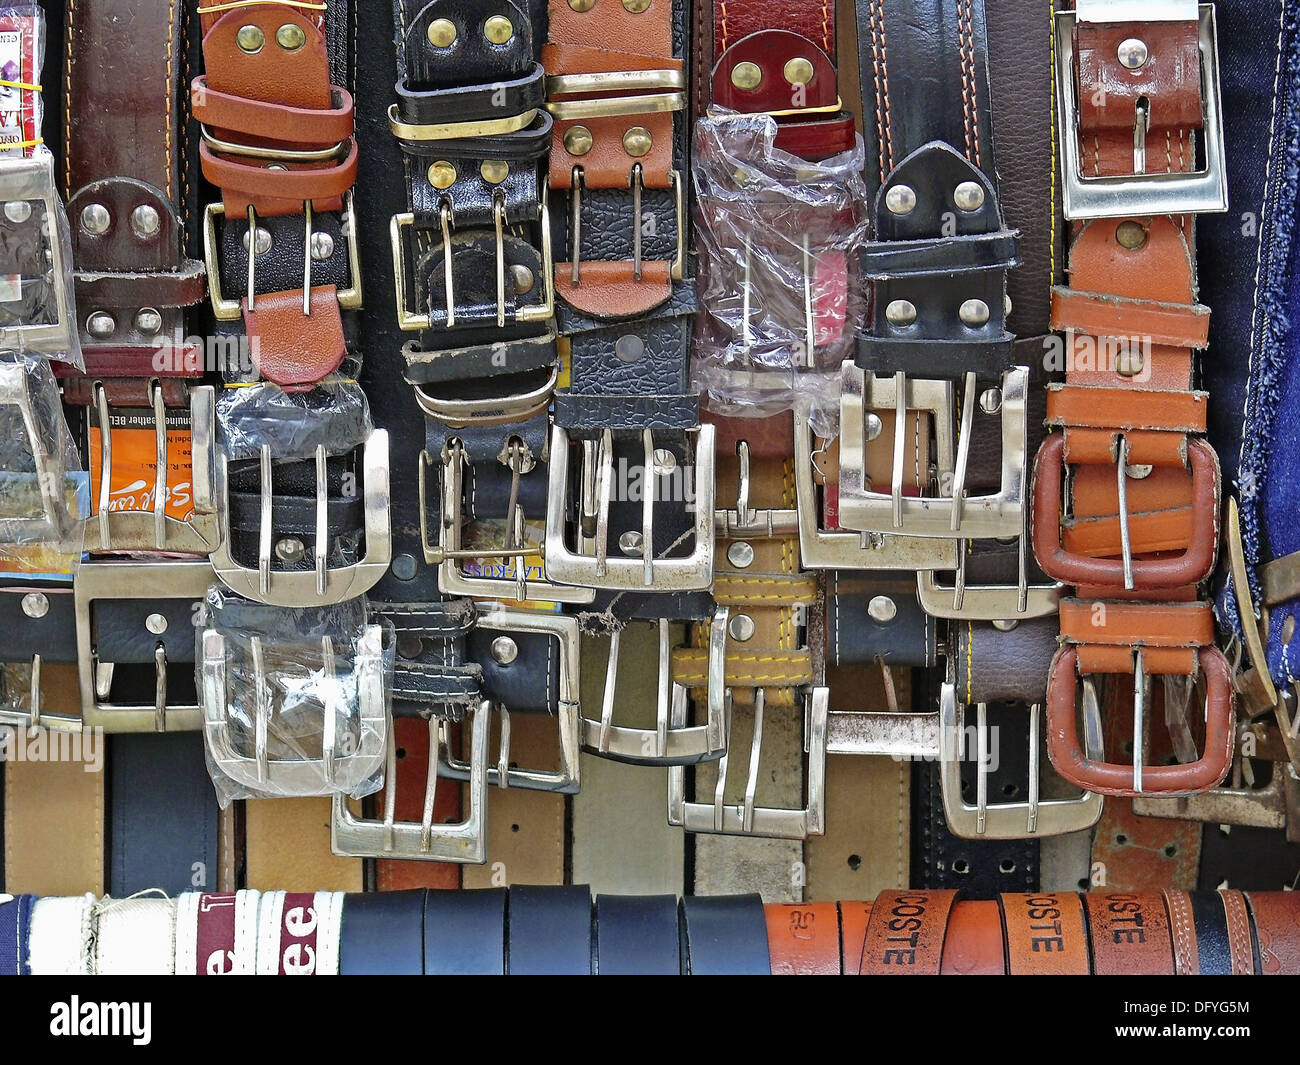 Belts on display Stand outside a shop Indore, Madhya pradesh, India Stock  Photo - Alamy